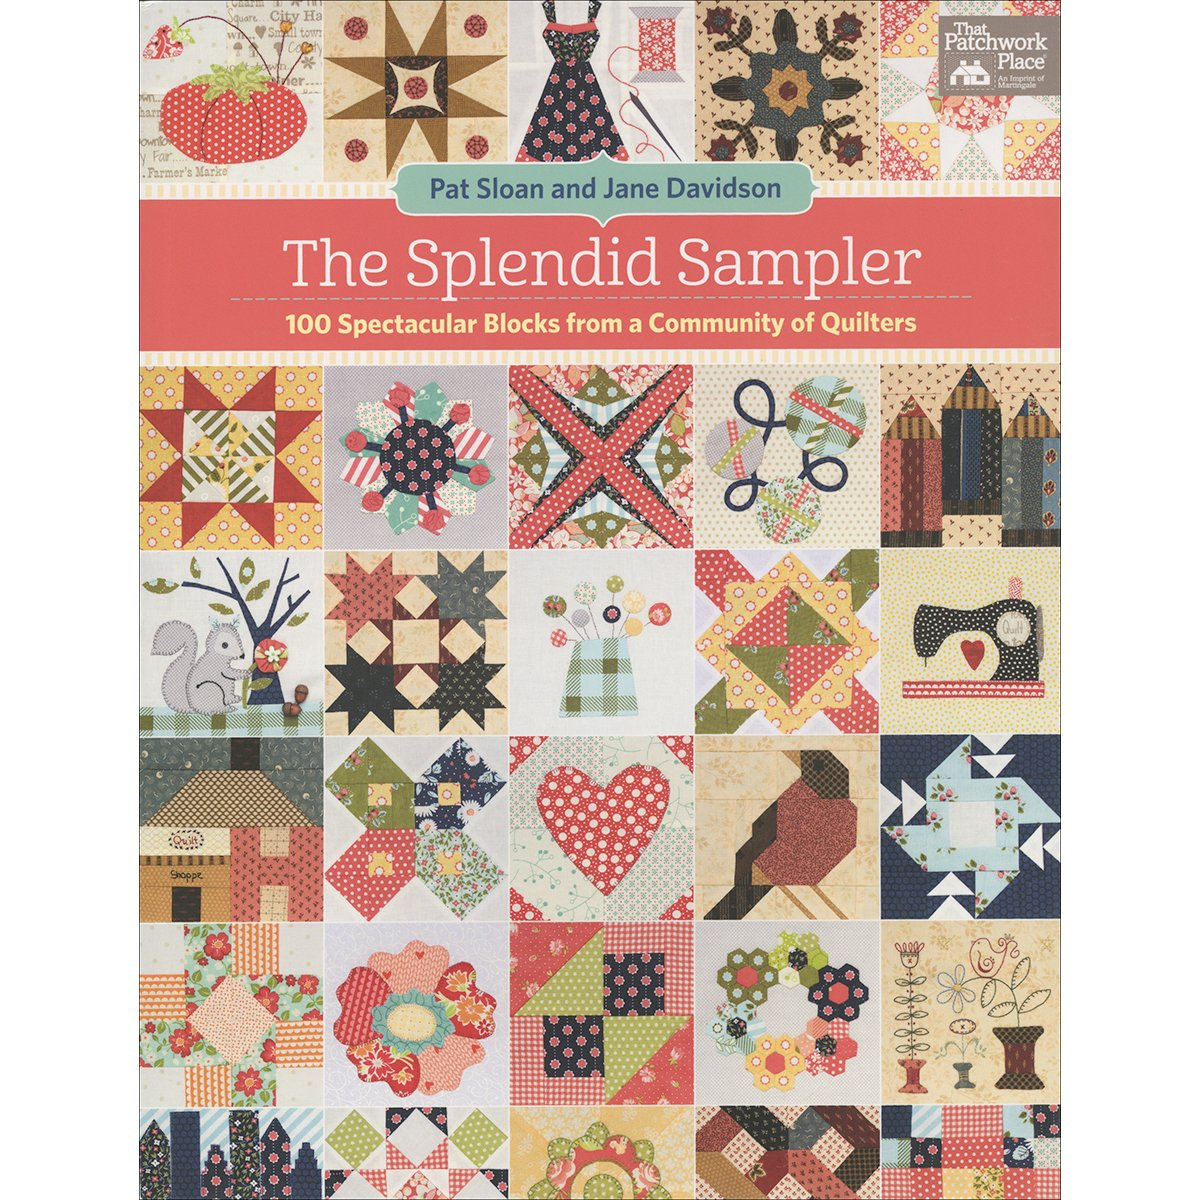 Embroidery Sampler Patterns Free Embroidery Sampler Patterns Free Embroidery Patterns